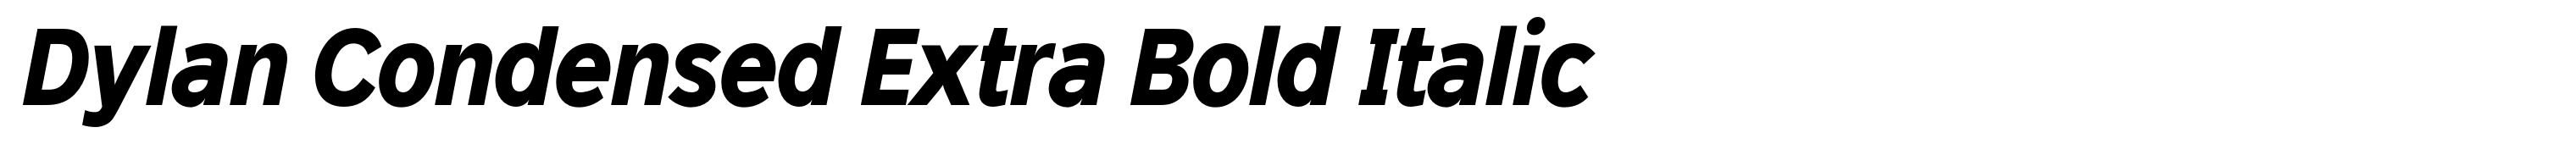 Dylan Condensed Extra Bold Italic